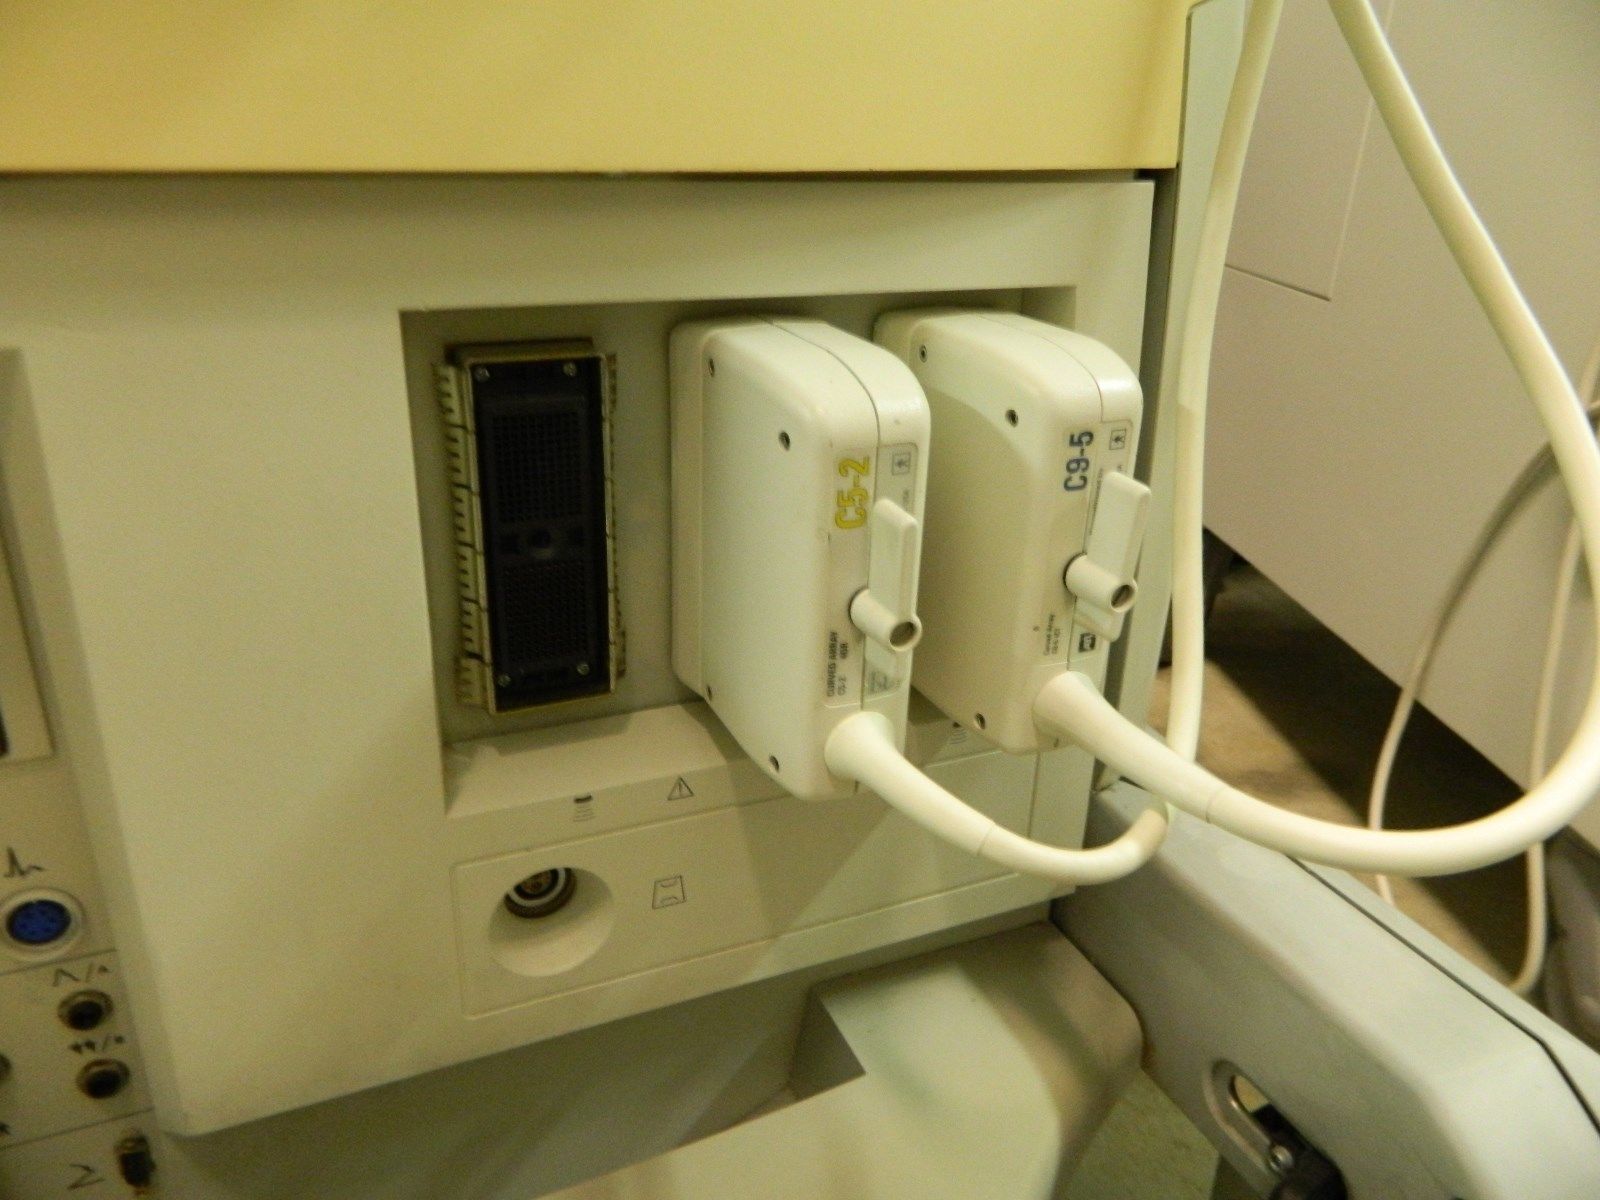 a close up of a machine with probes attached to it